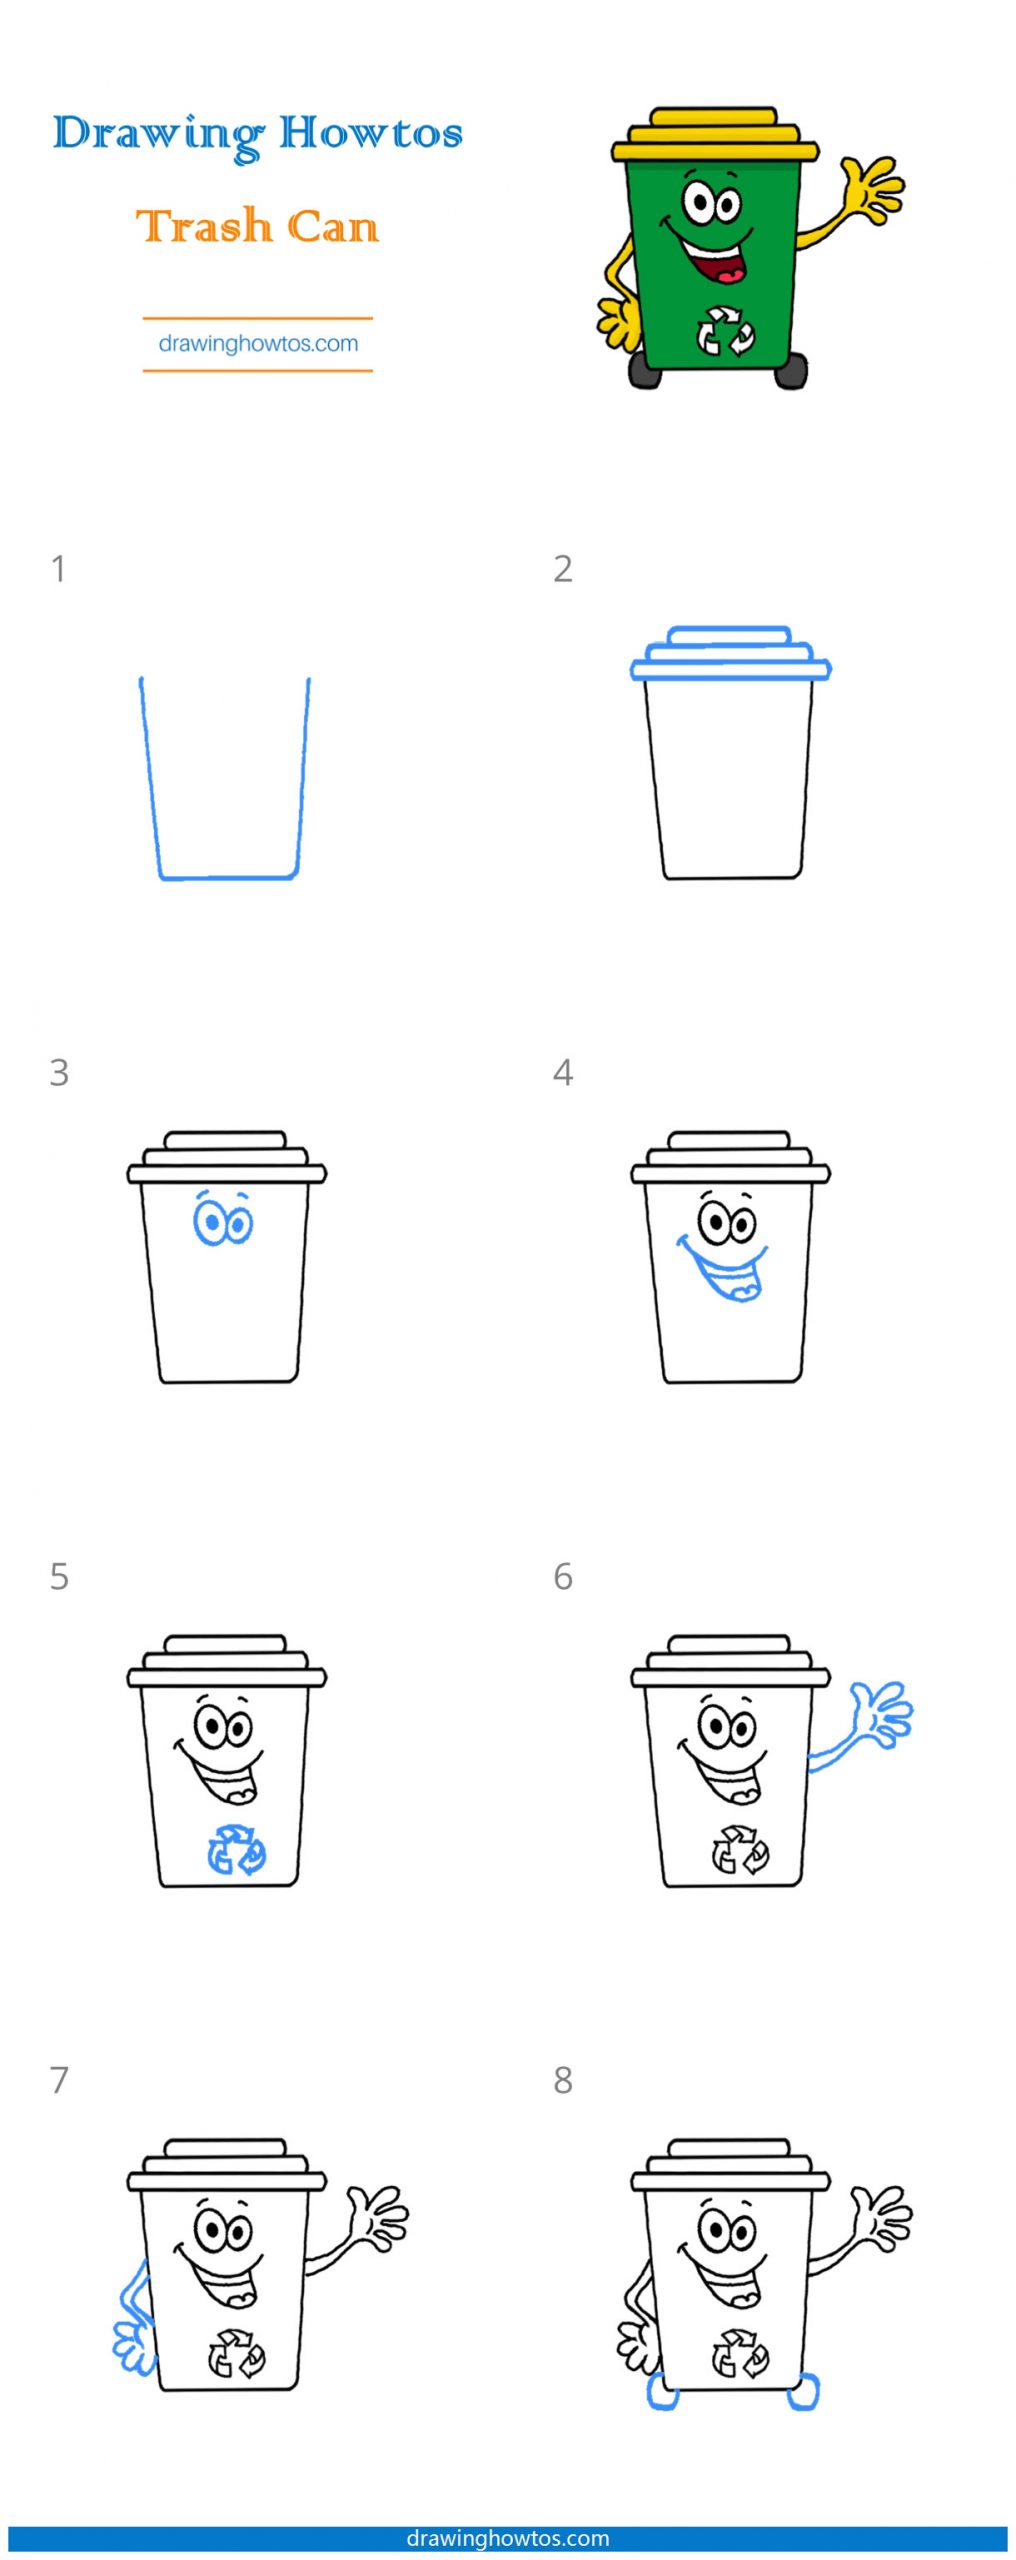 How to Draw a Trash Can Step by Step